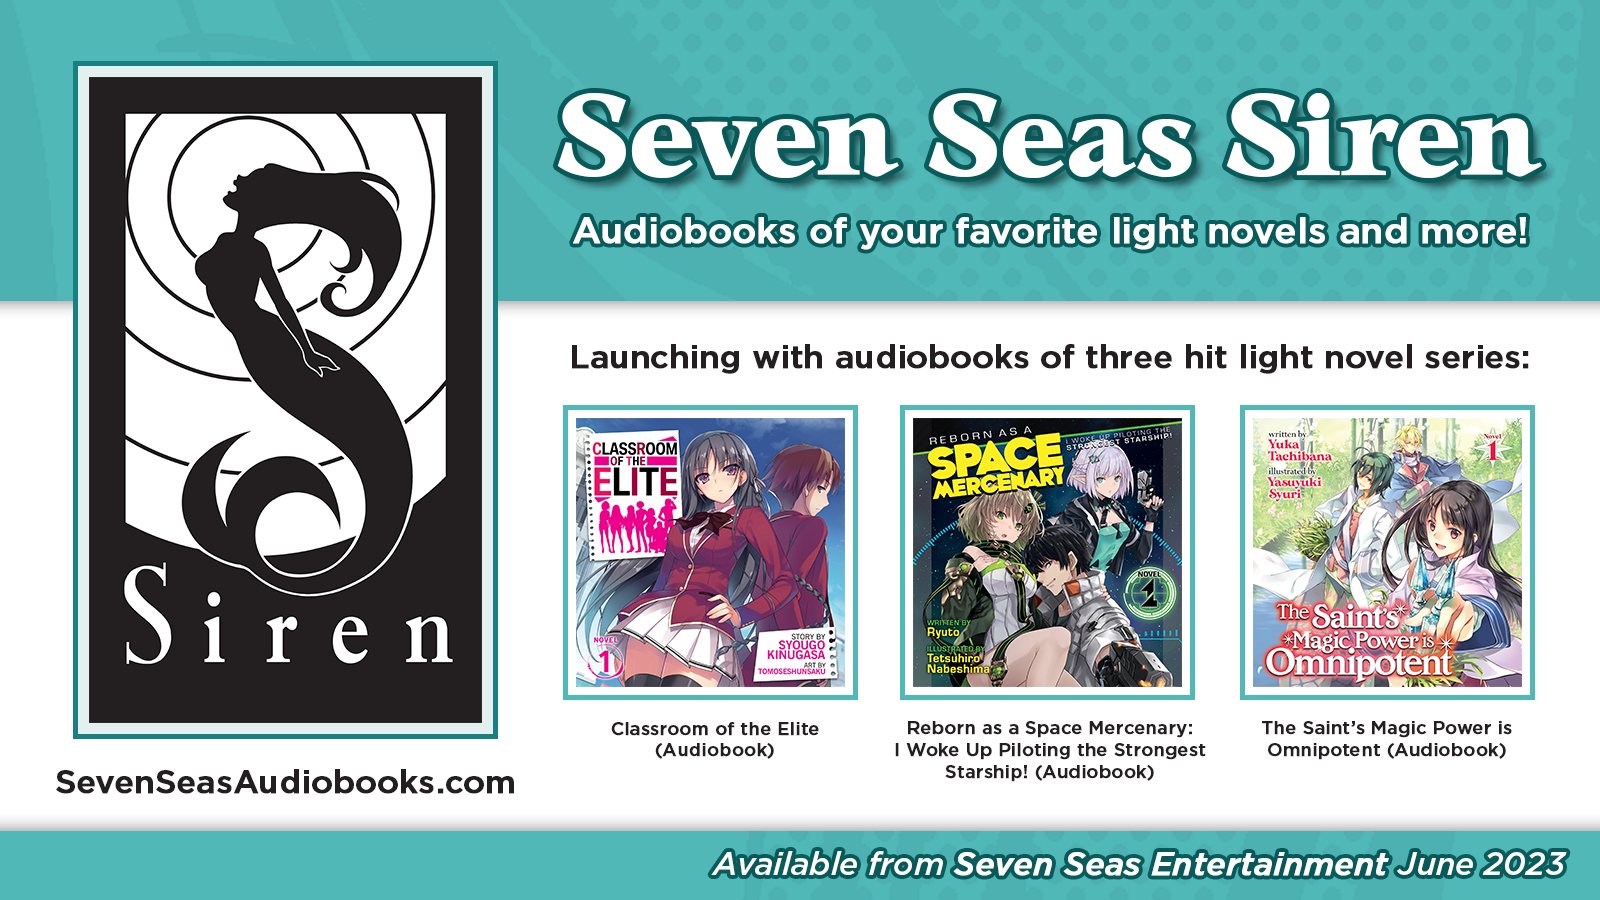 Classroom of the Elite and More Audiobooks to Come from New Seven Seas Audiobook Imprint